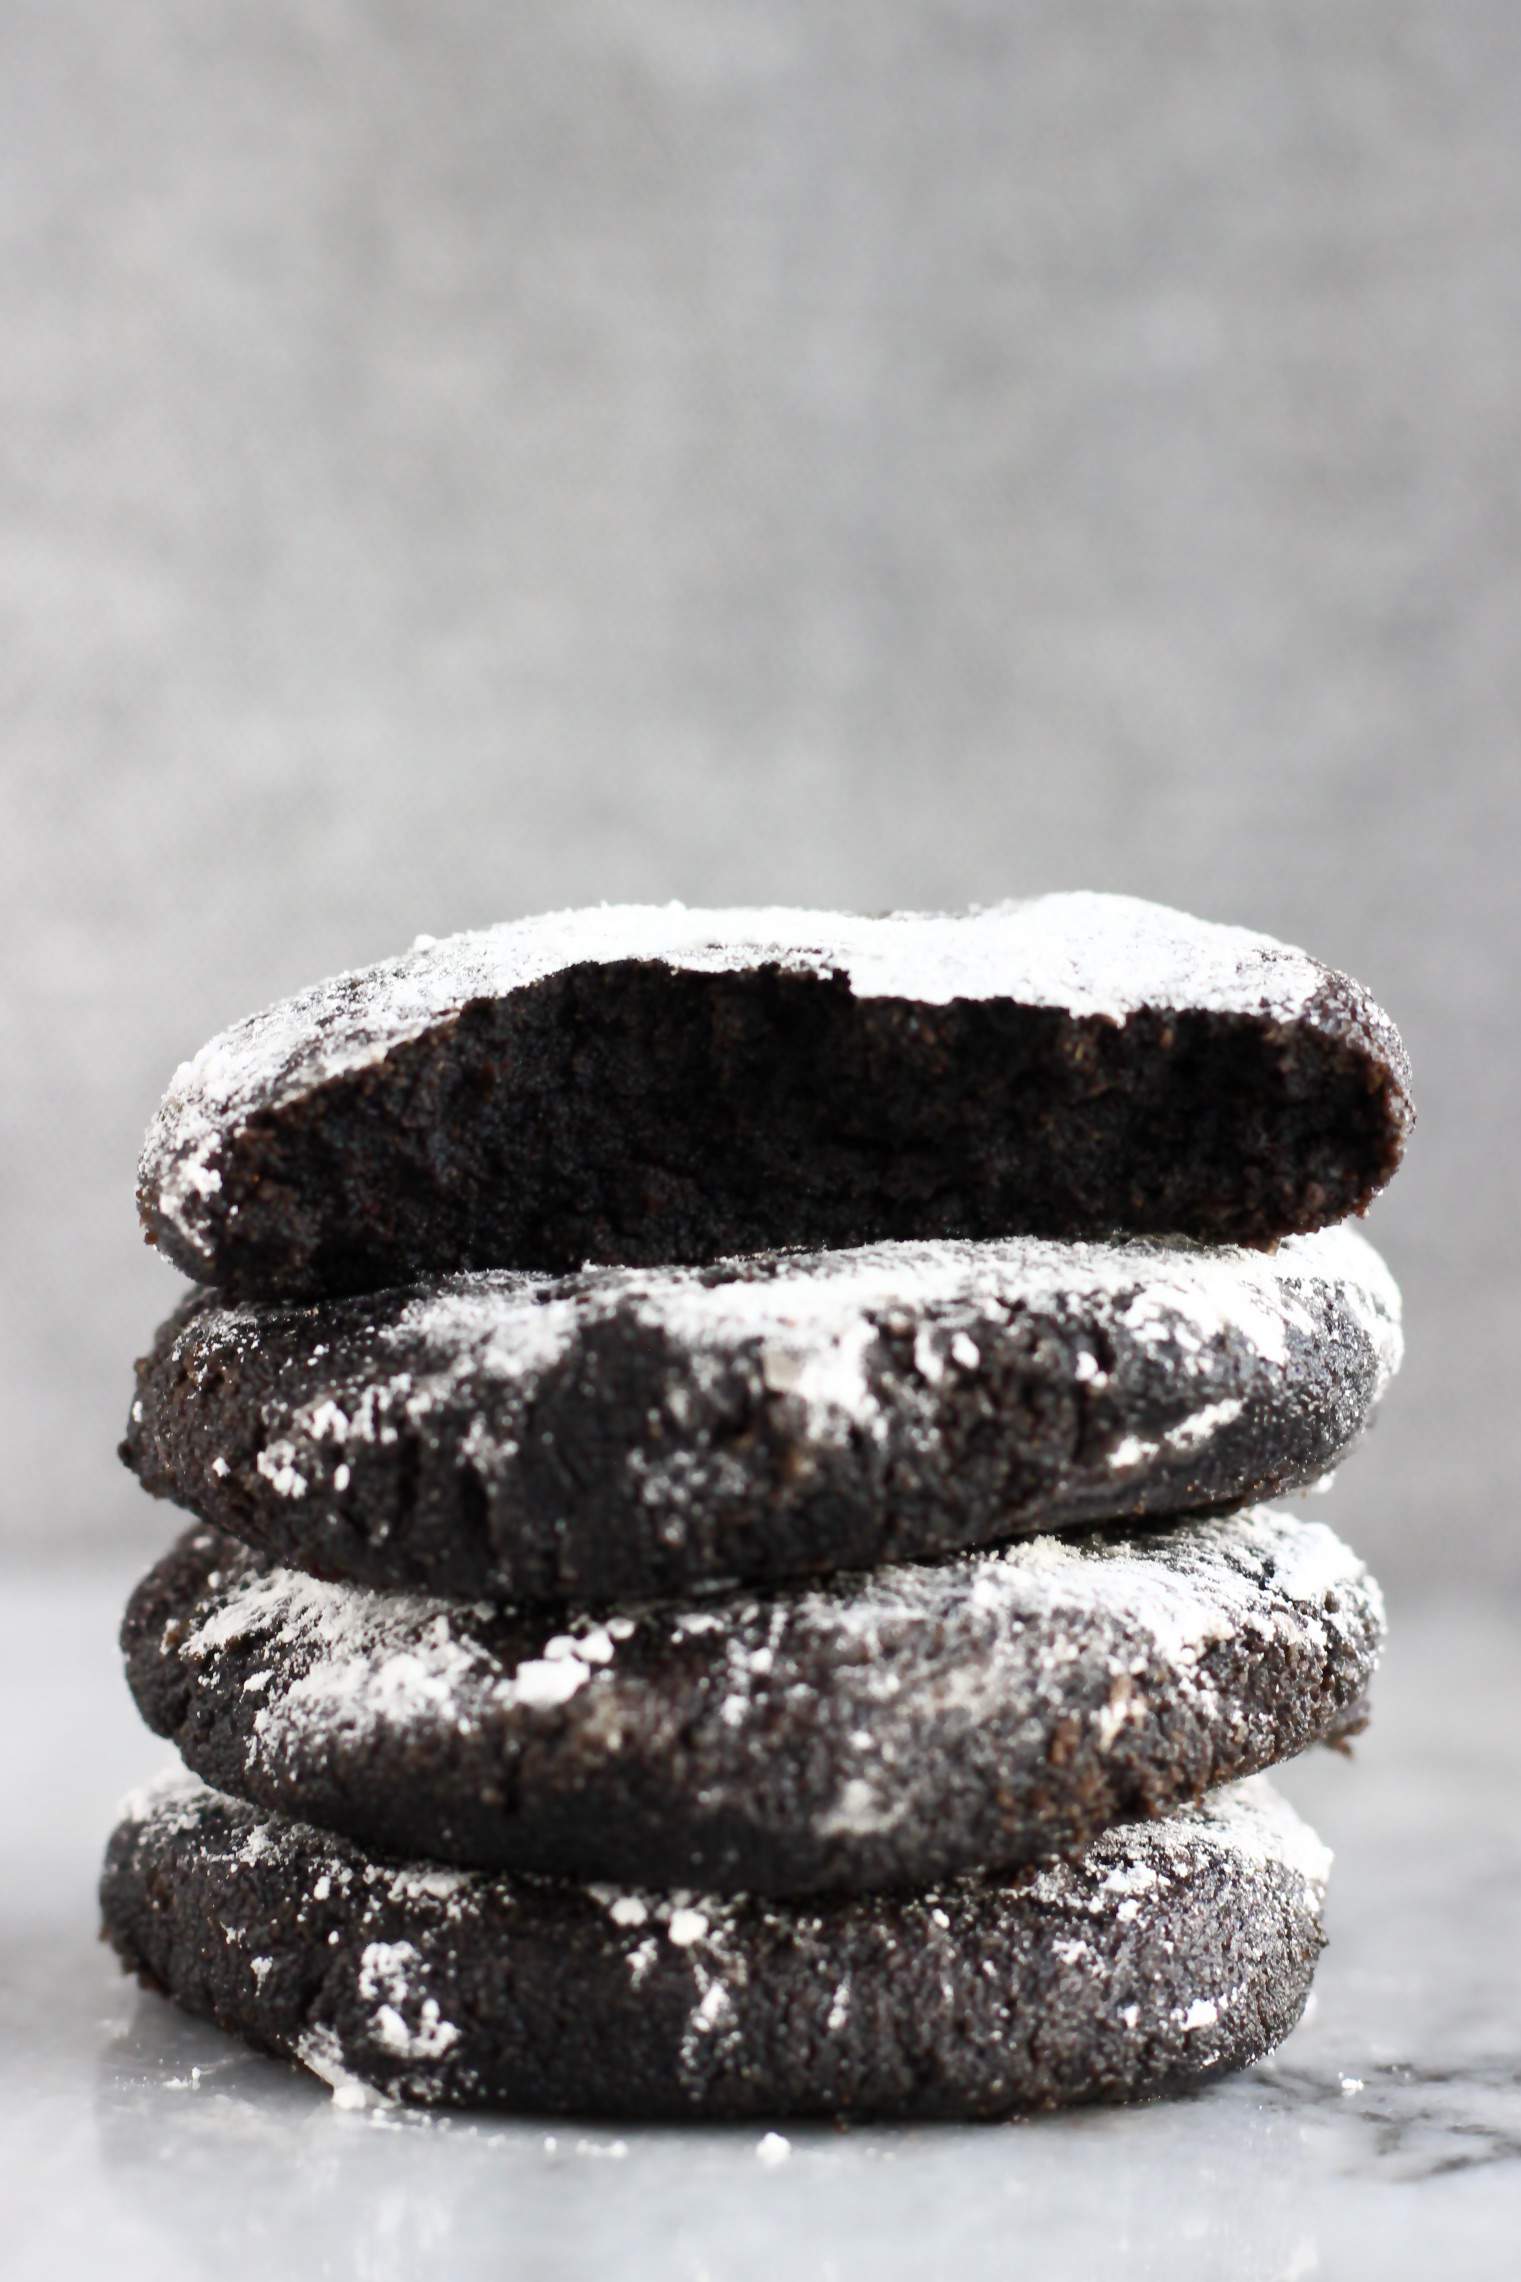 A stack of four gluten-free vegan chocolate crinkle cookies